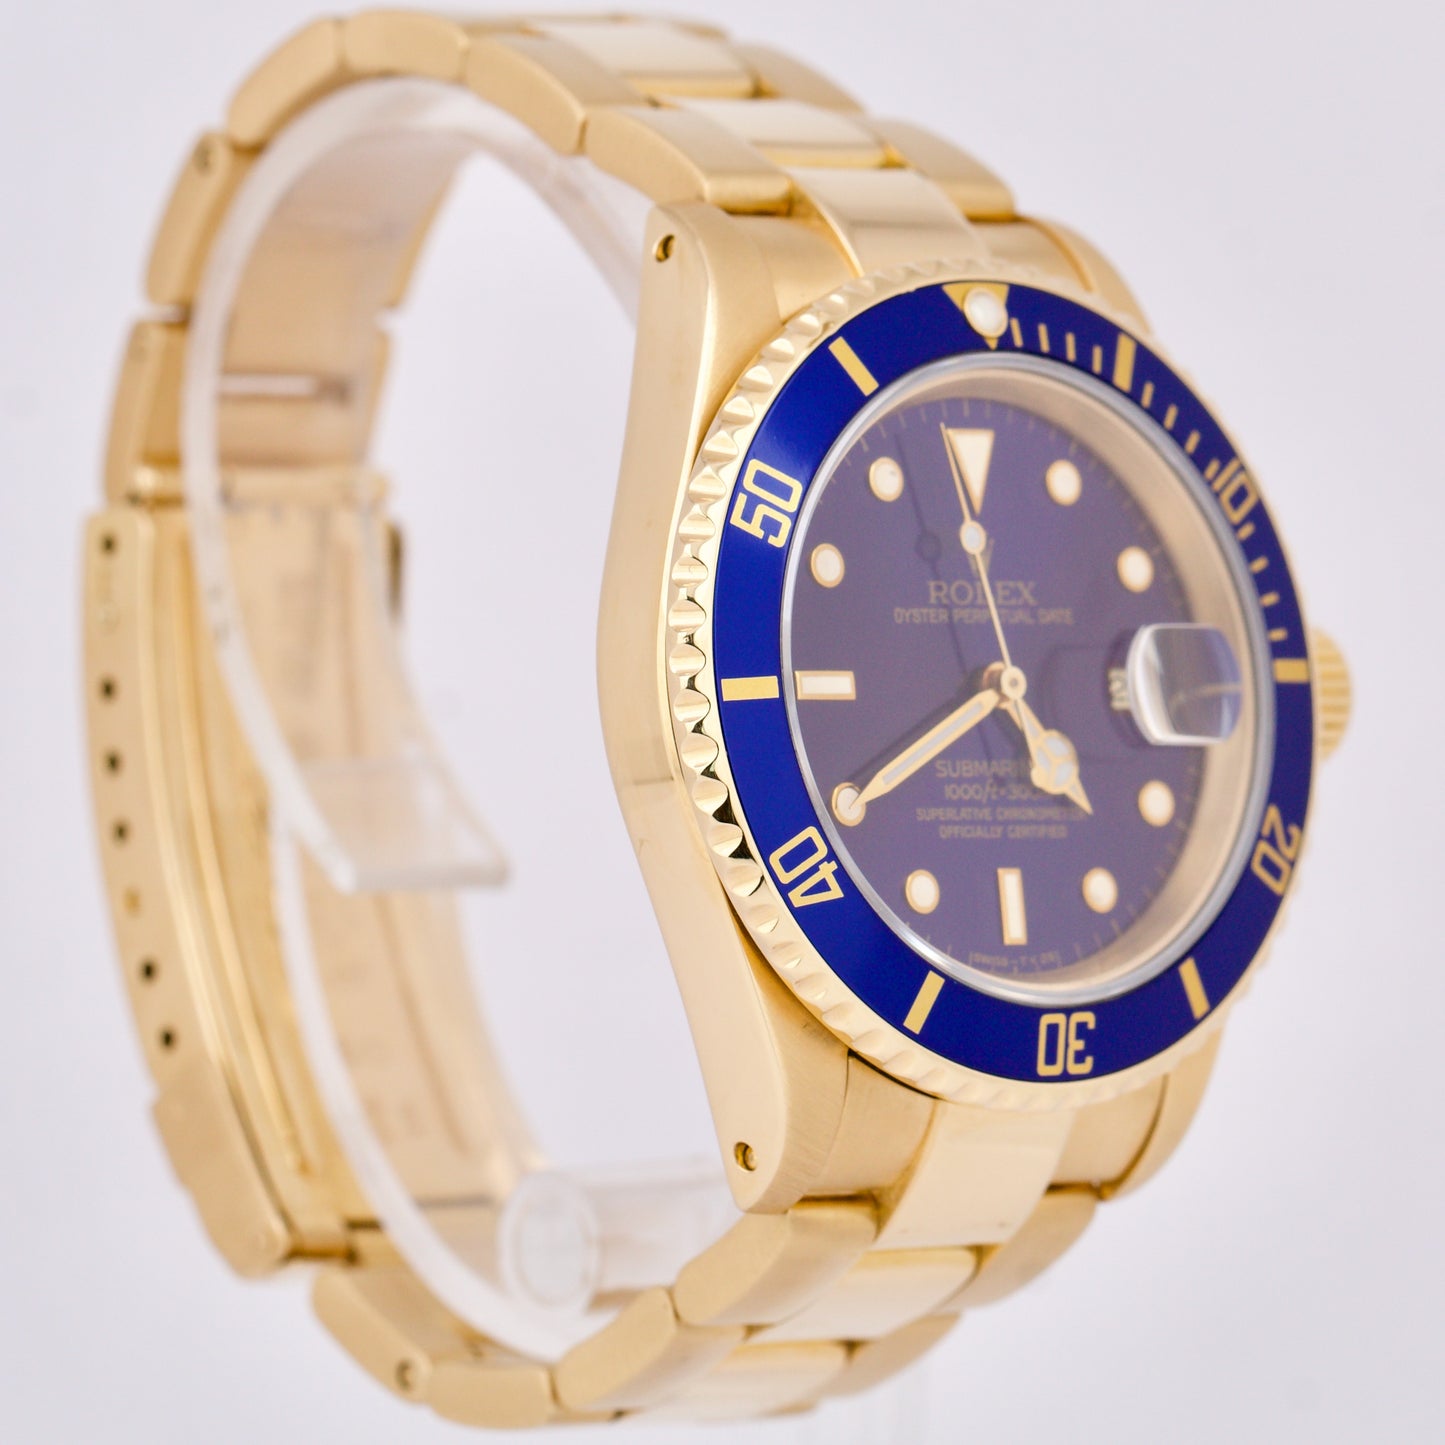 Rolex Submariner Date BLUE 18K Yellow Gold 40mm Oyster Automatic 16618 Watch